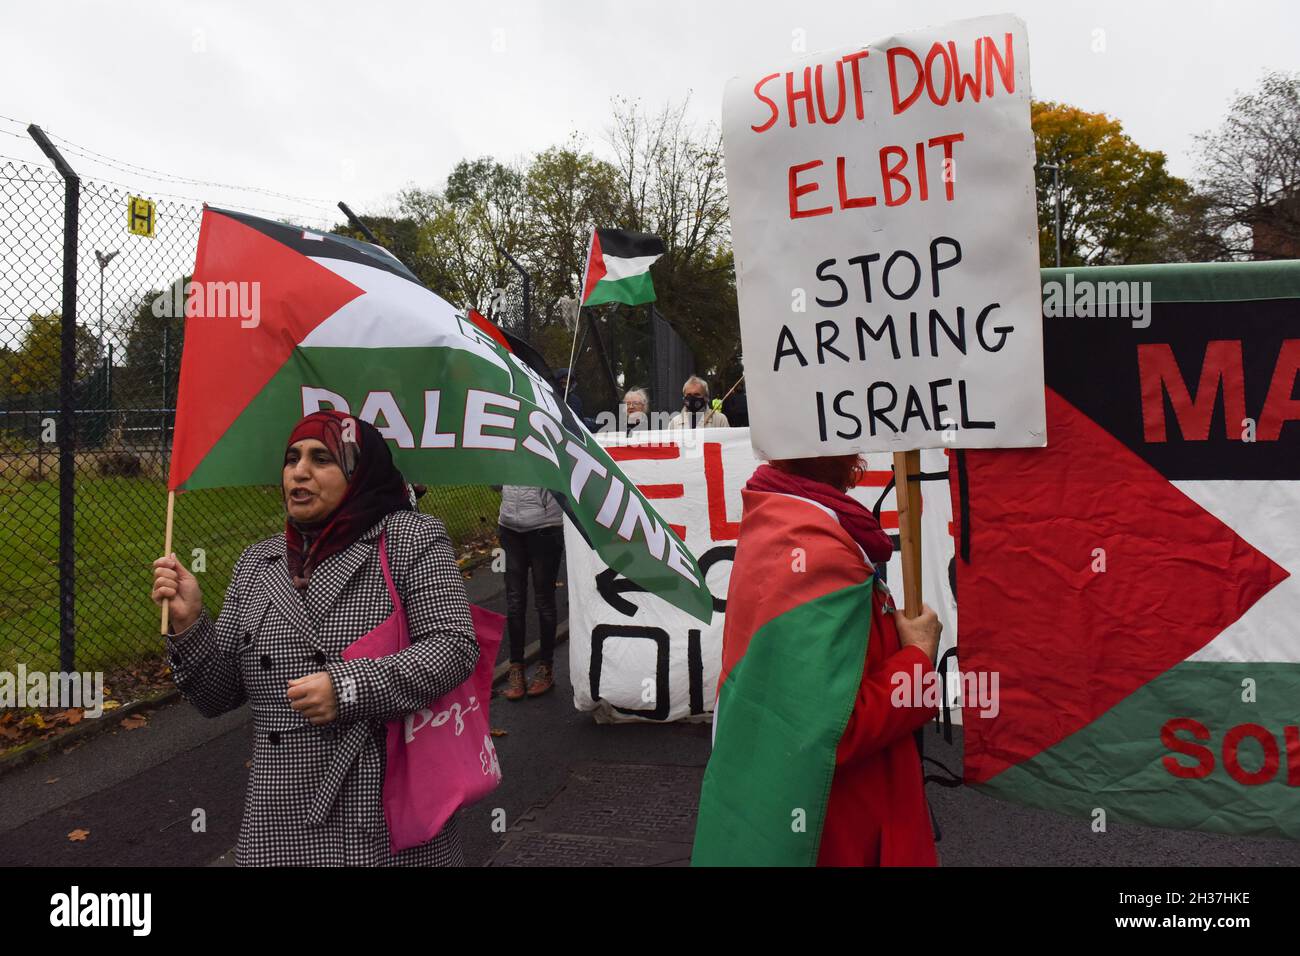 Ferranti Technologies, Oldham, Lancashire, 26th October 2021. A Free Palestine protest at Ferranti Technologies, part of Elbit Systems an Aerospace and defense company in Oldham. Protestors chanted slogans calling for the end of the occupation of Palestine by Israel. British Rapper Lowkey also made speeches and sang to crowd. Pic by Credit: Sam Holiday/Alamy Live News Stock Photo